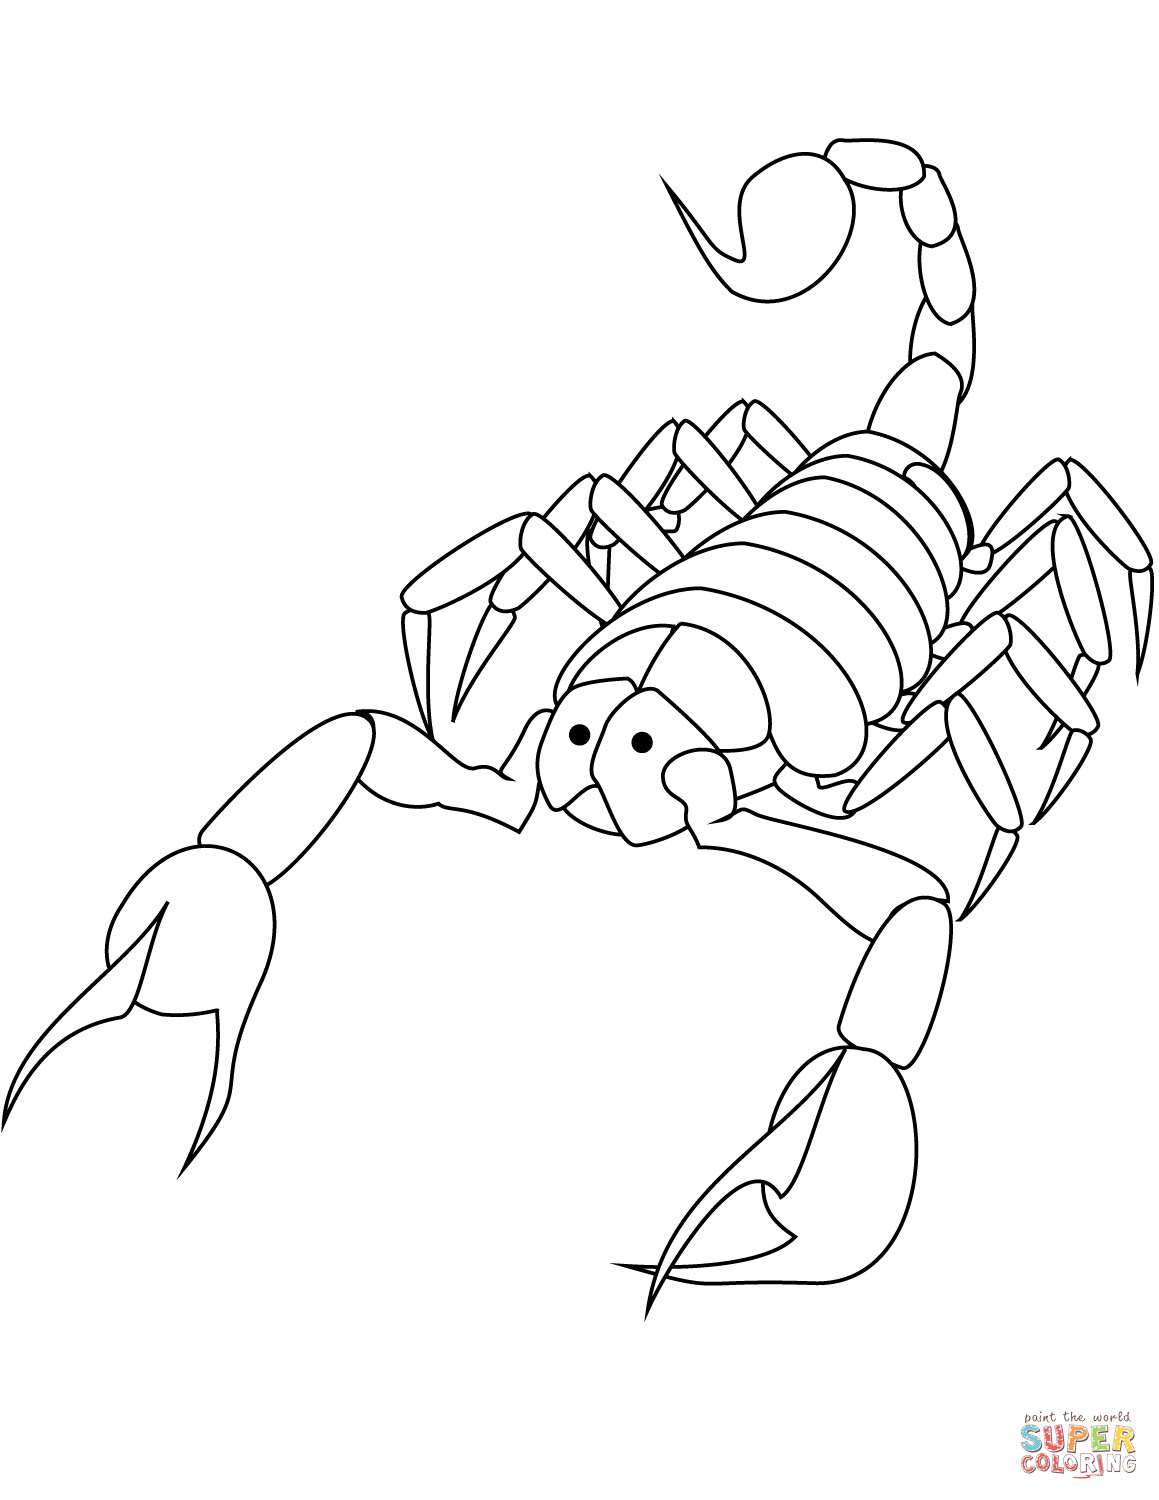 Scorpion Coloring Pages
 Scorpion coloring page